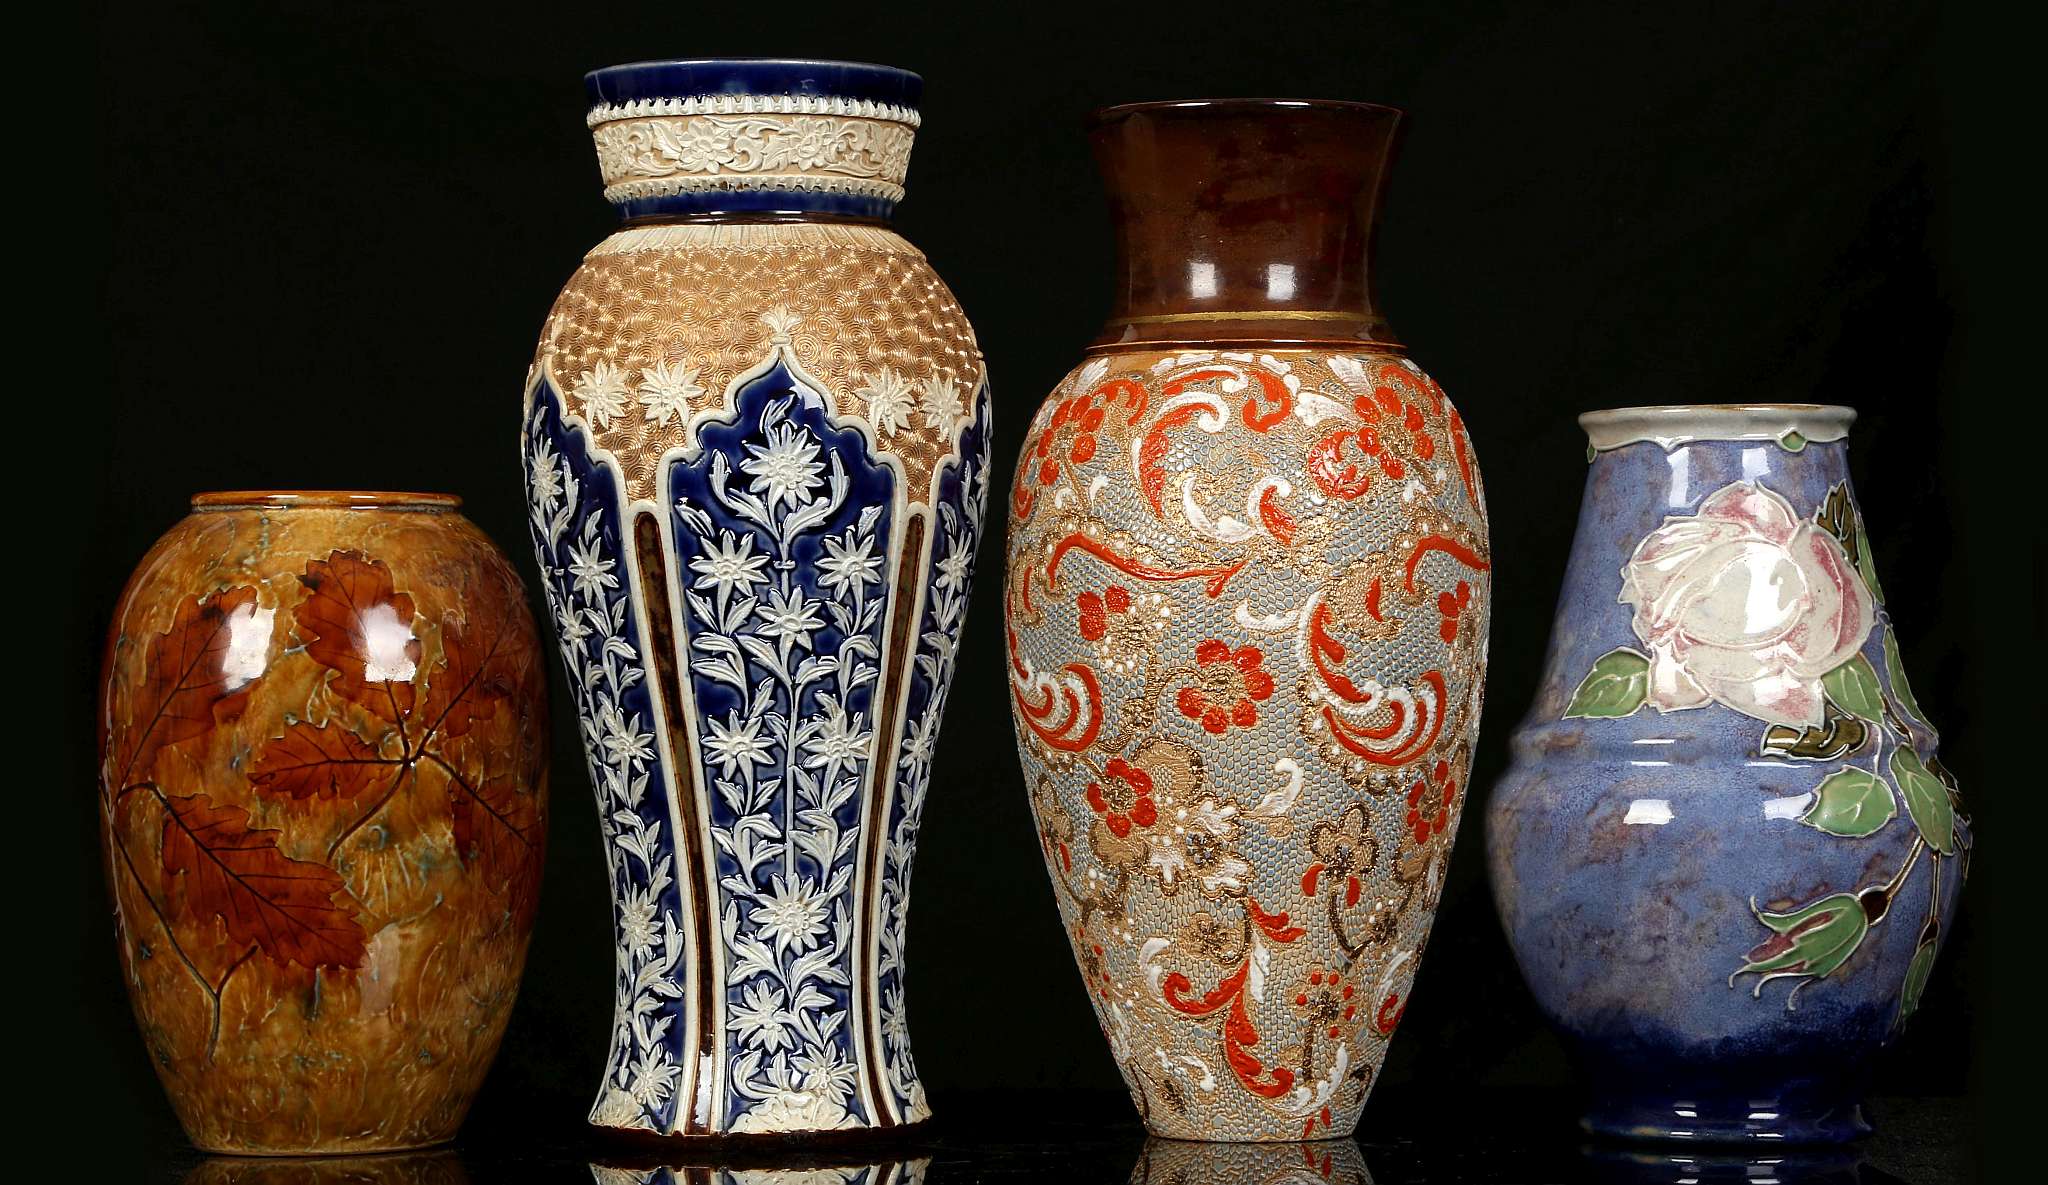 FOUR INTERESTING DOULTON VASES, early 20th century, comprising a Royal Doulton 'Natural Foliage